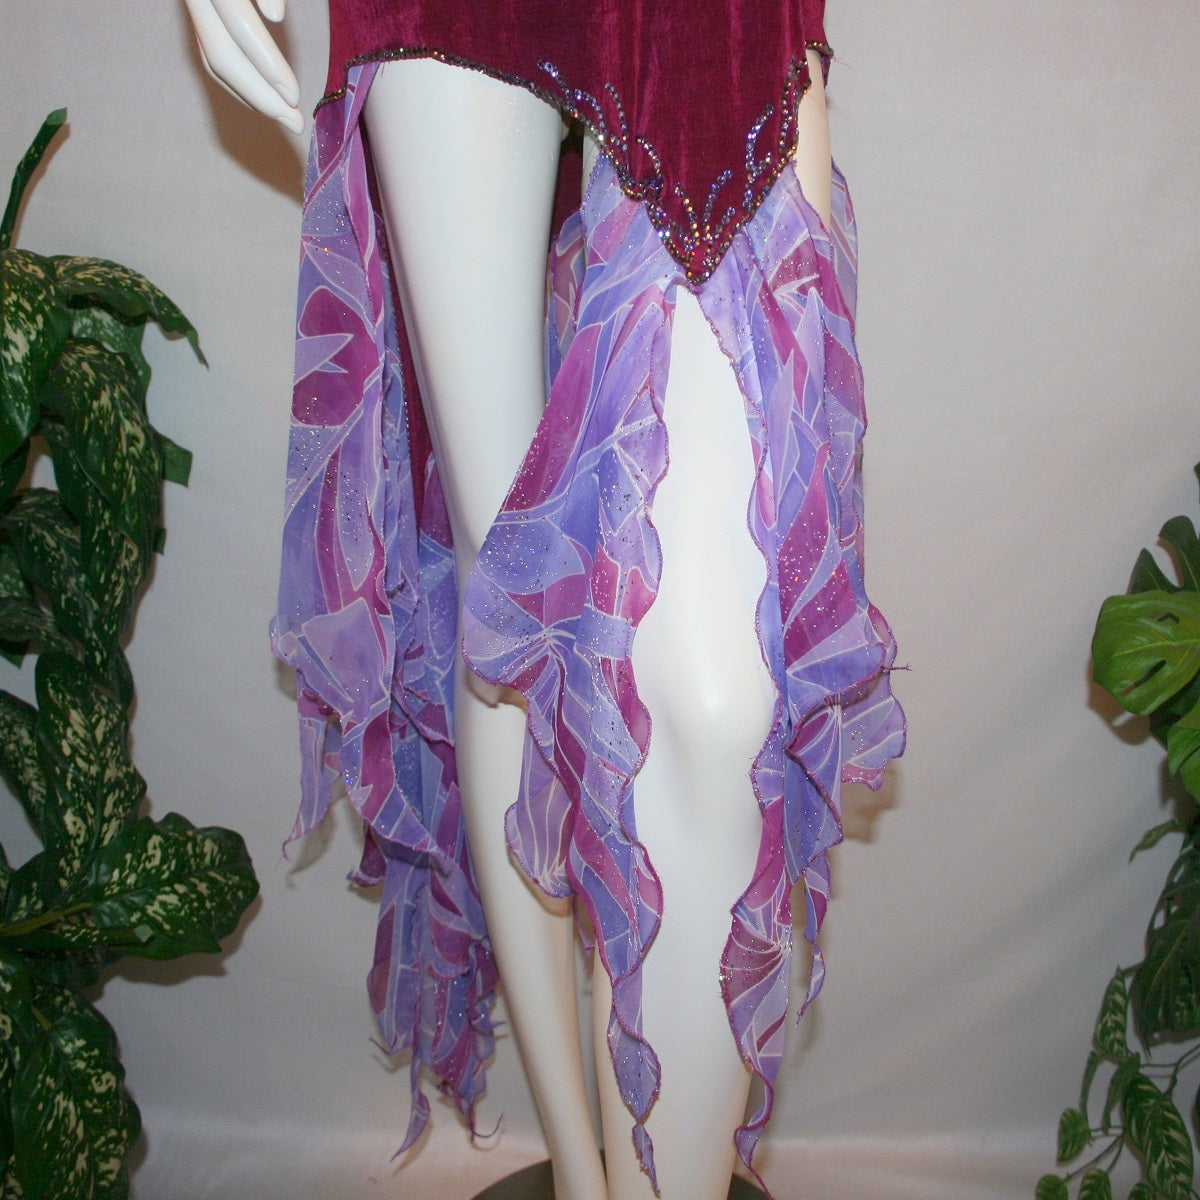 Crystal's Creations lower details of Magenta converta ballroom dress created of magenta solid slinky on a nude illusion base with tropical chiffon print skirtings of magenta & orchids, is embellished with tanzanite & orchid rhinestone work.